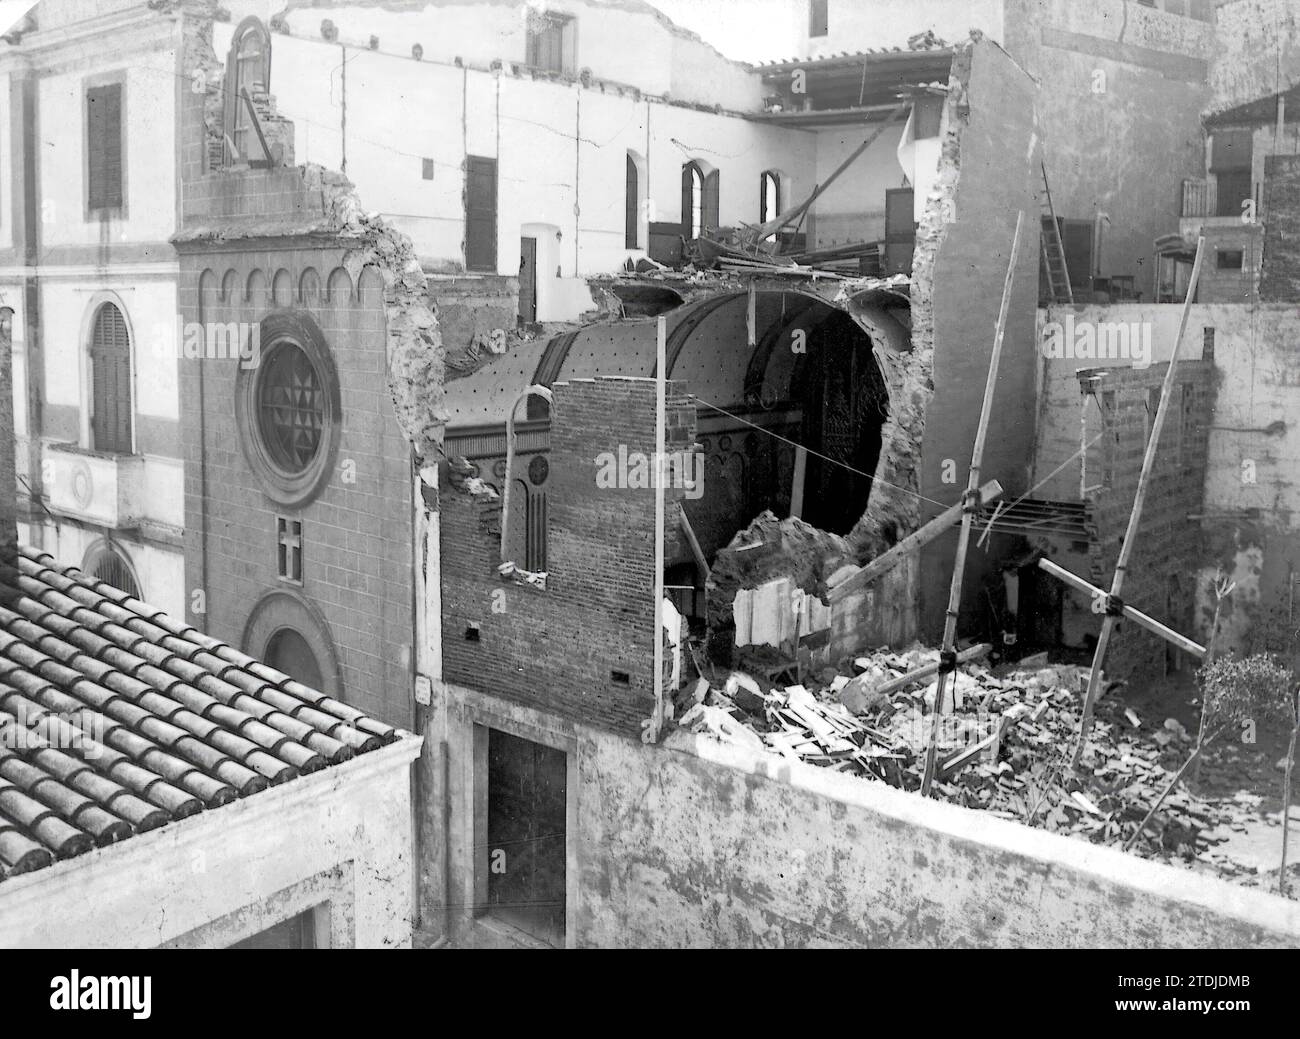 03/02/1911. The Arenys de Mar catastrophe: the state of the Escolapias Sisters convent as a result of the collapse that occurred on Last Friday, and in which two Nuns lost their lives. Credit: Album / Archivo ABC / Federico Ballell Stock Photo